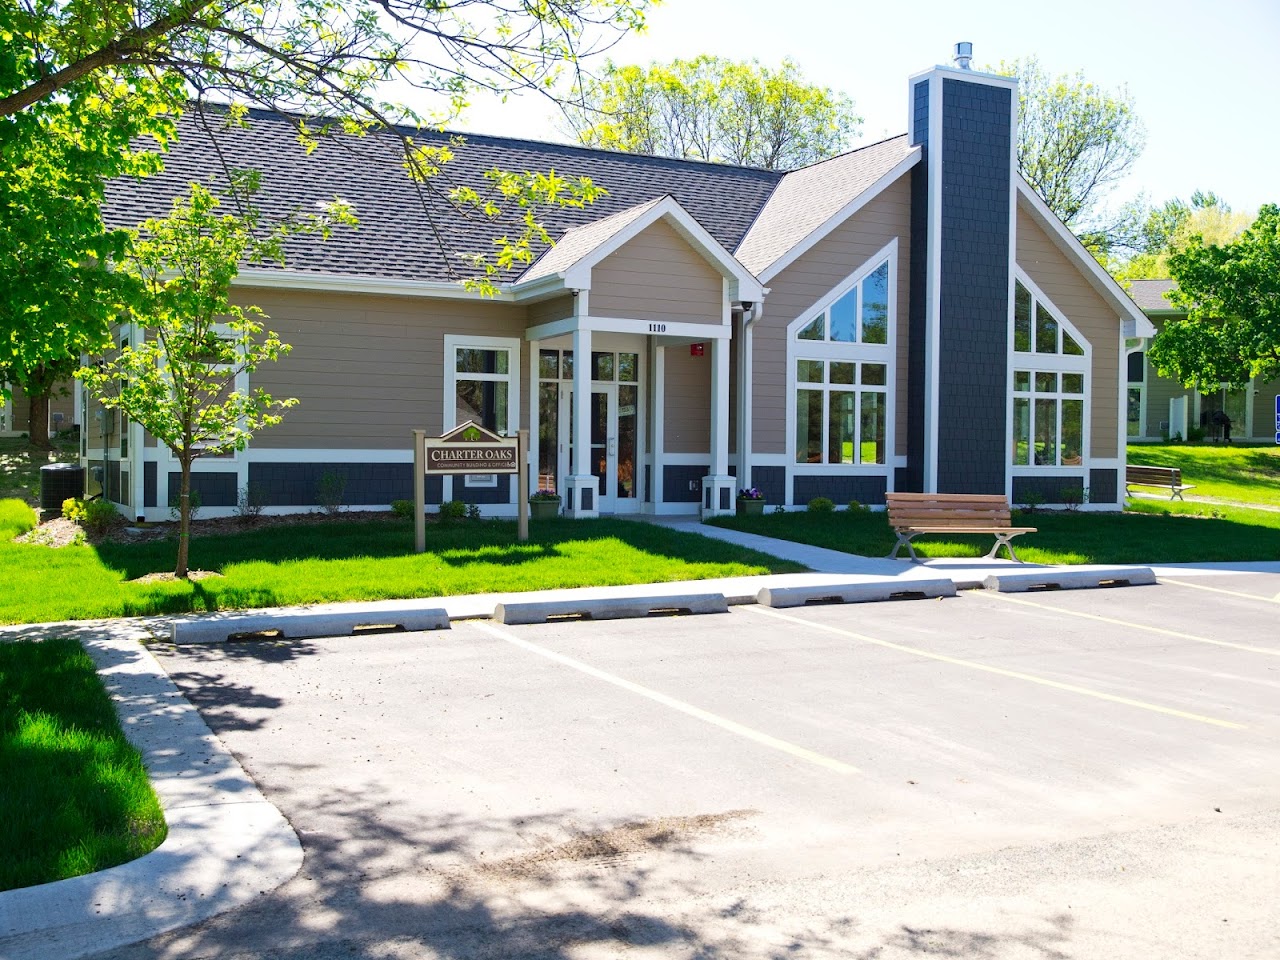 Photo of CHARTER OAK TOWNHOMES. Affordable housing located at MULTIPLE BUILDING ADDRESSES STILLWATER, MN 55082